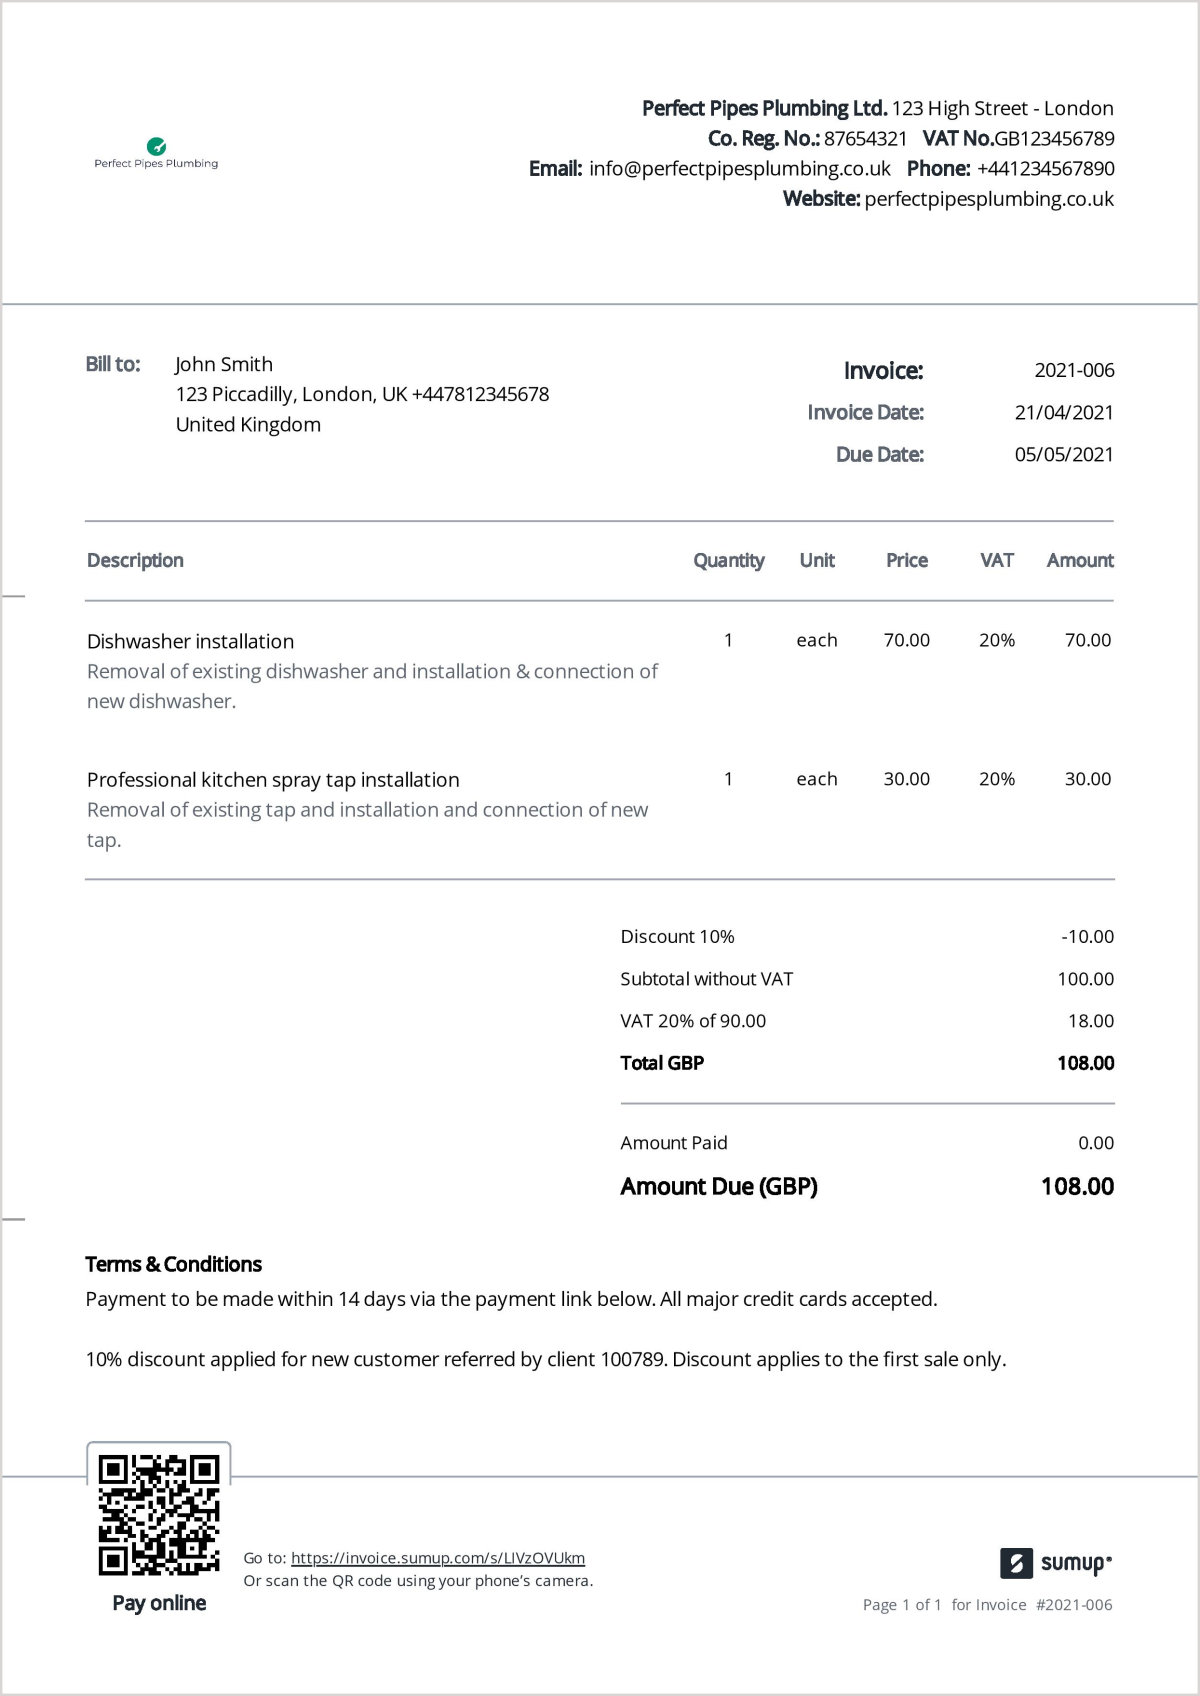 Example invoice with payment terms. The invoice explains the discount rules and that payment should be made within 14 days via a payment link on the invoice.